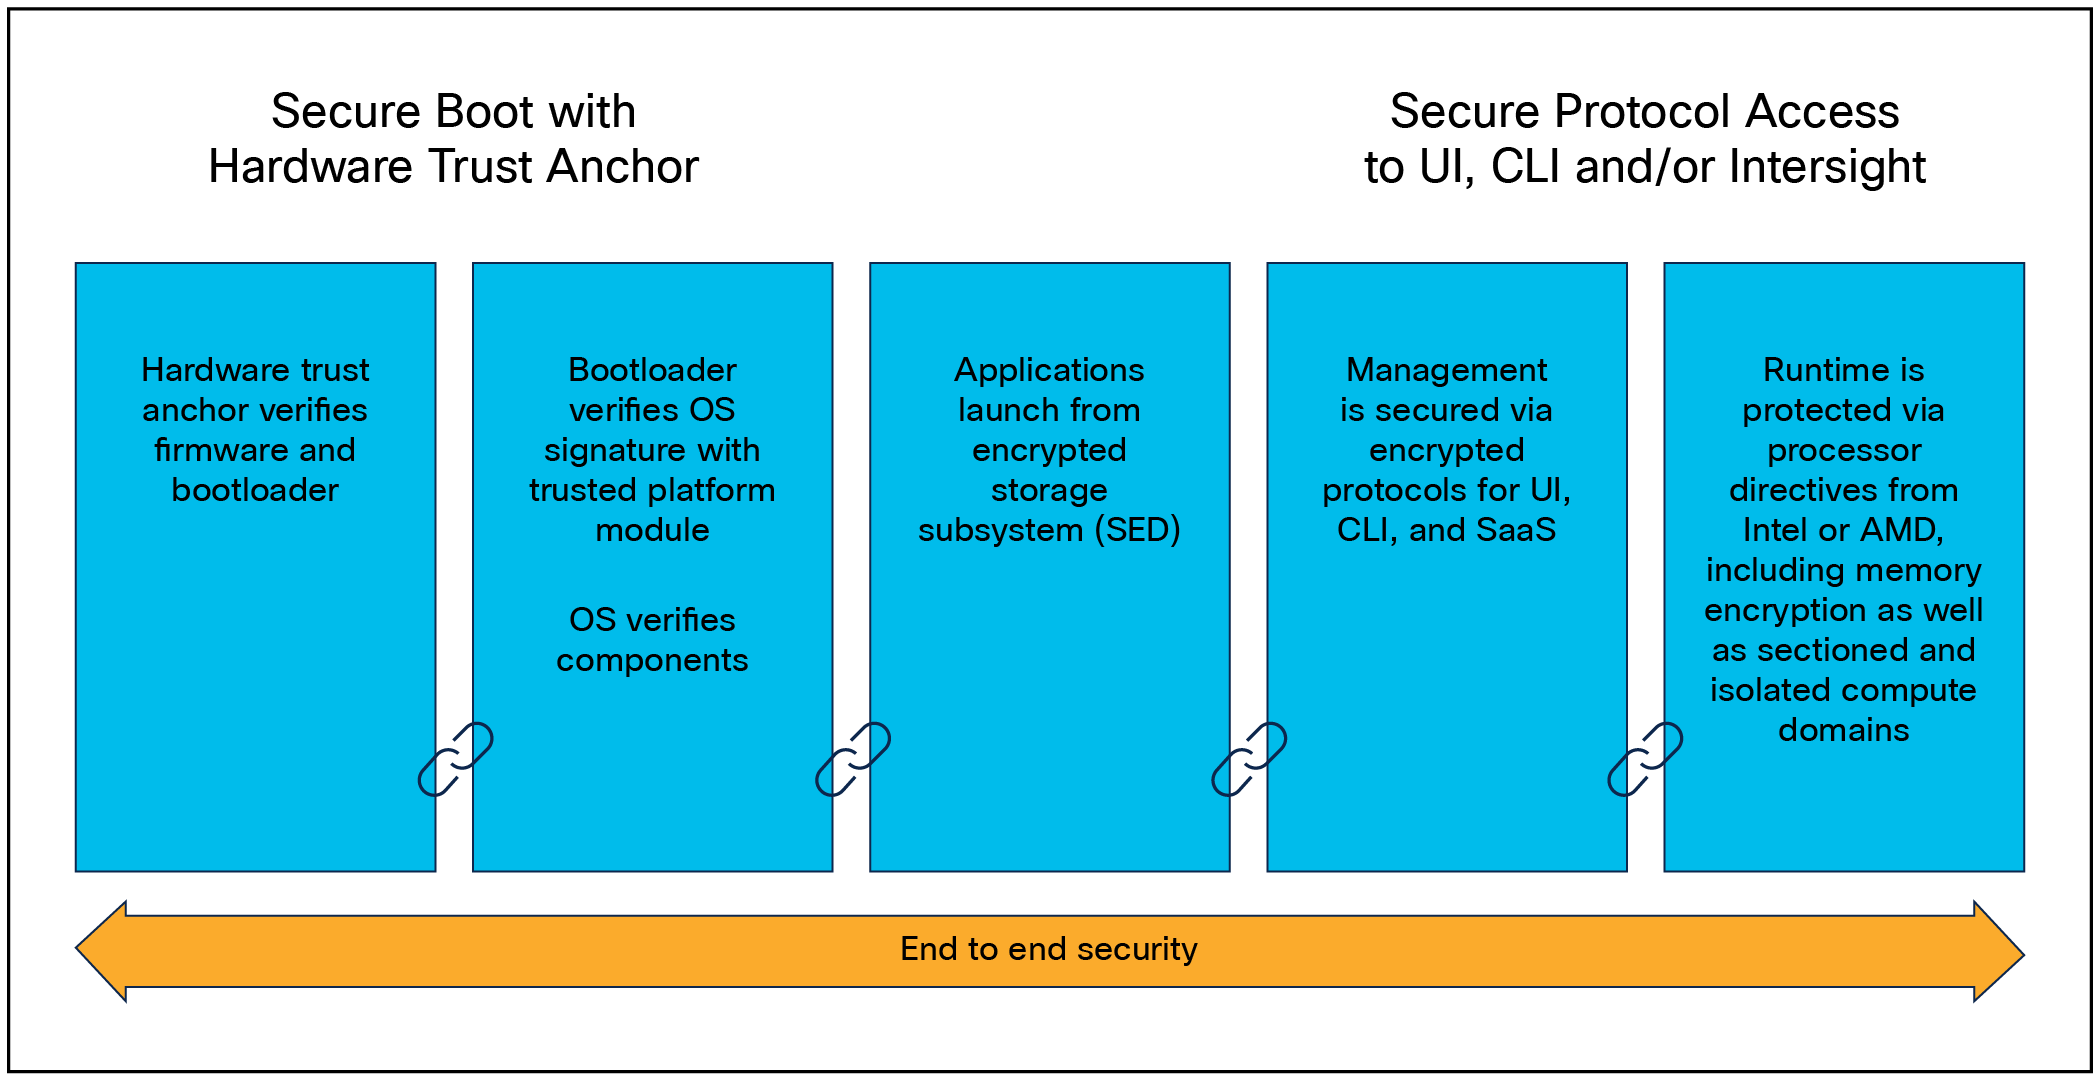 End-to-end security at the system level from bootloader to runtime defenses